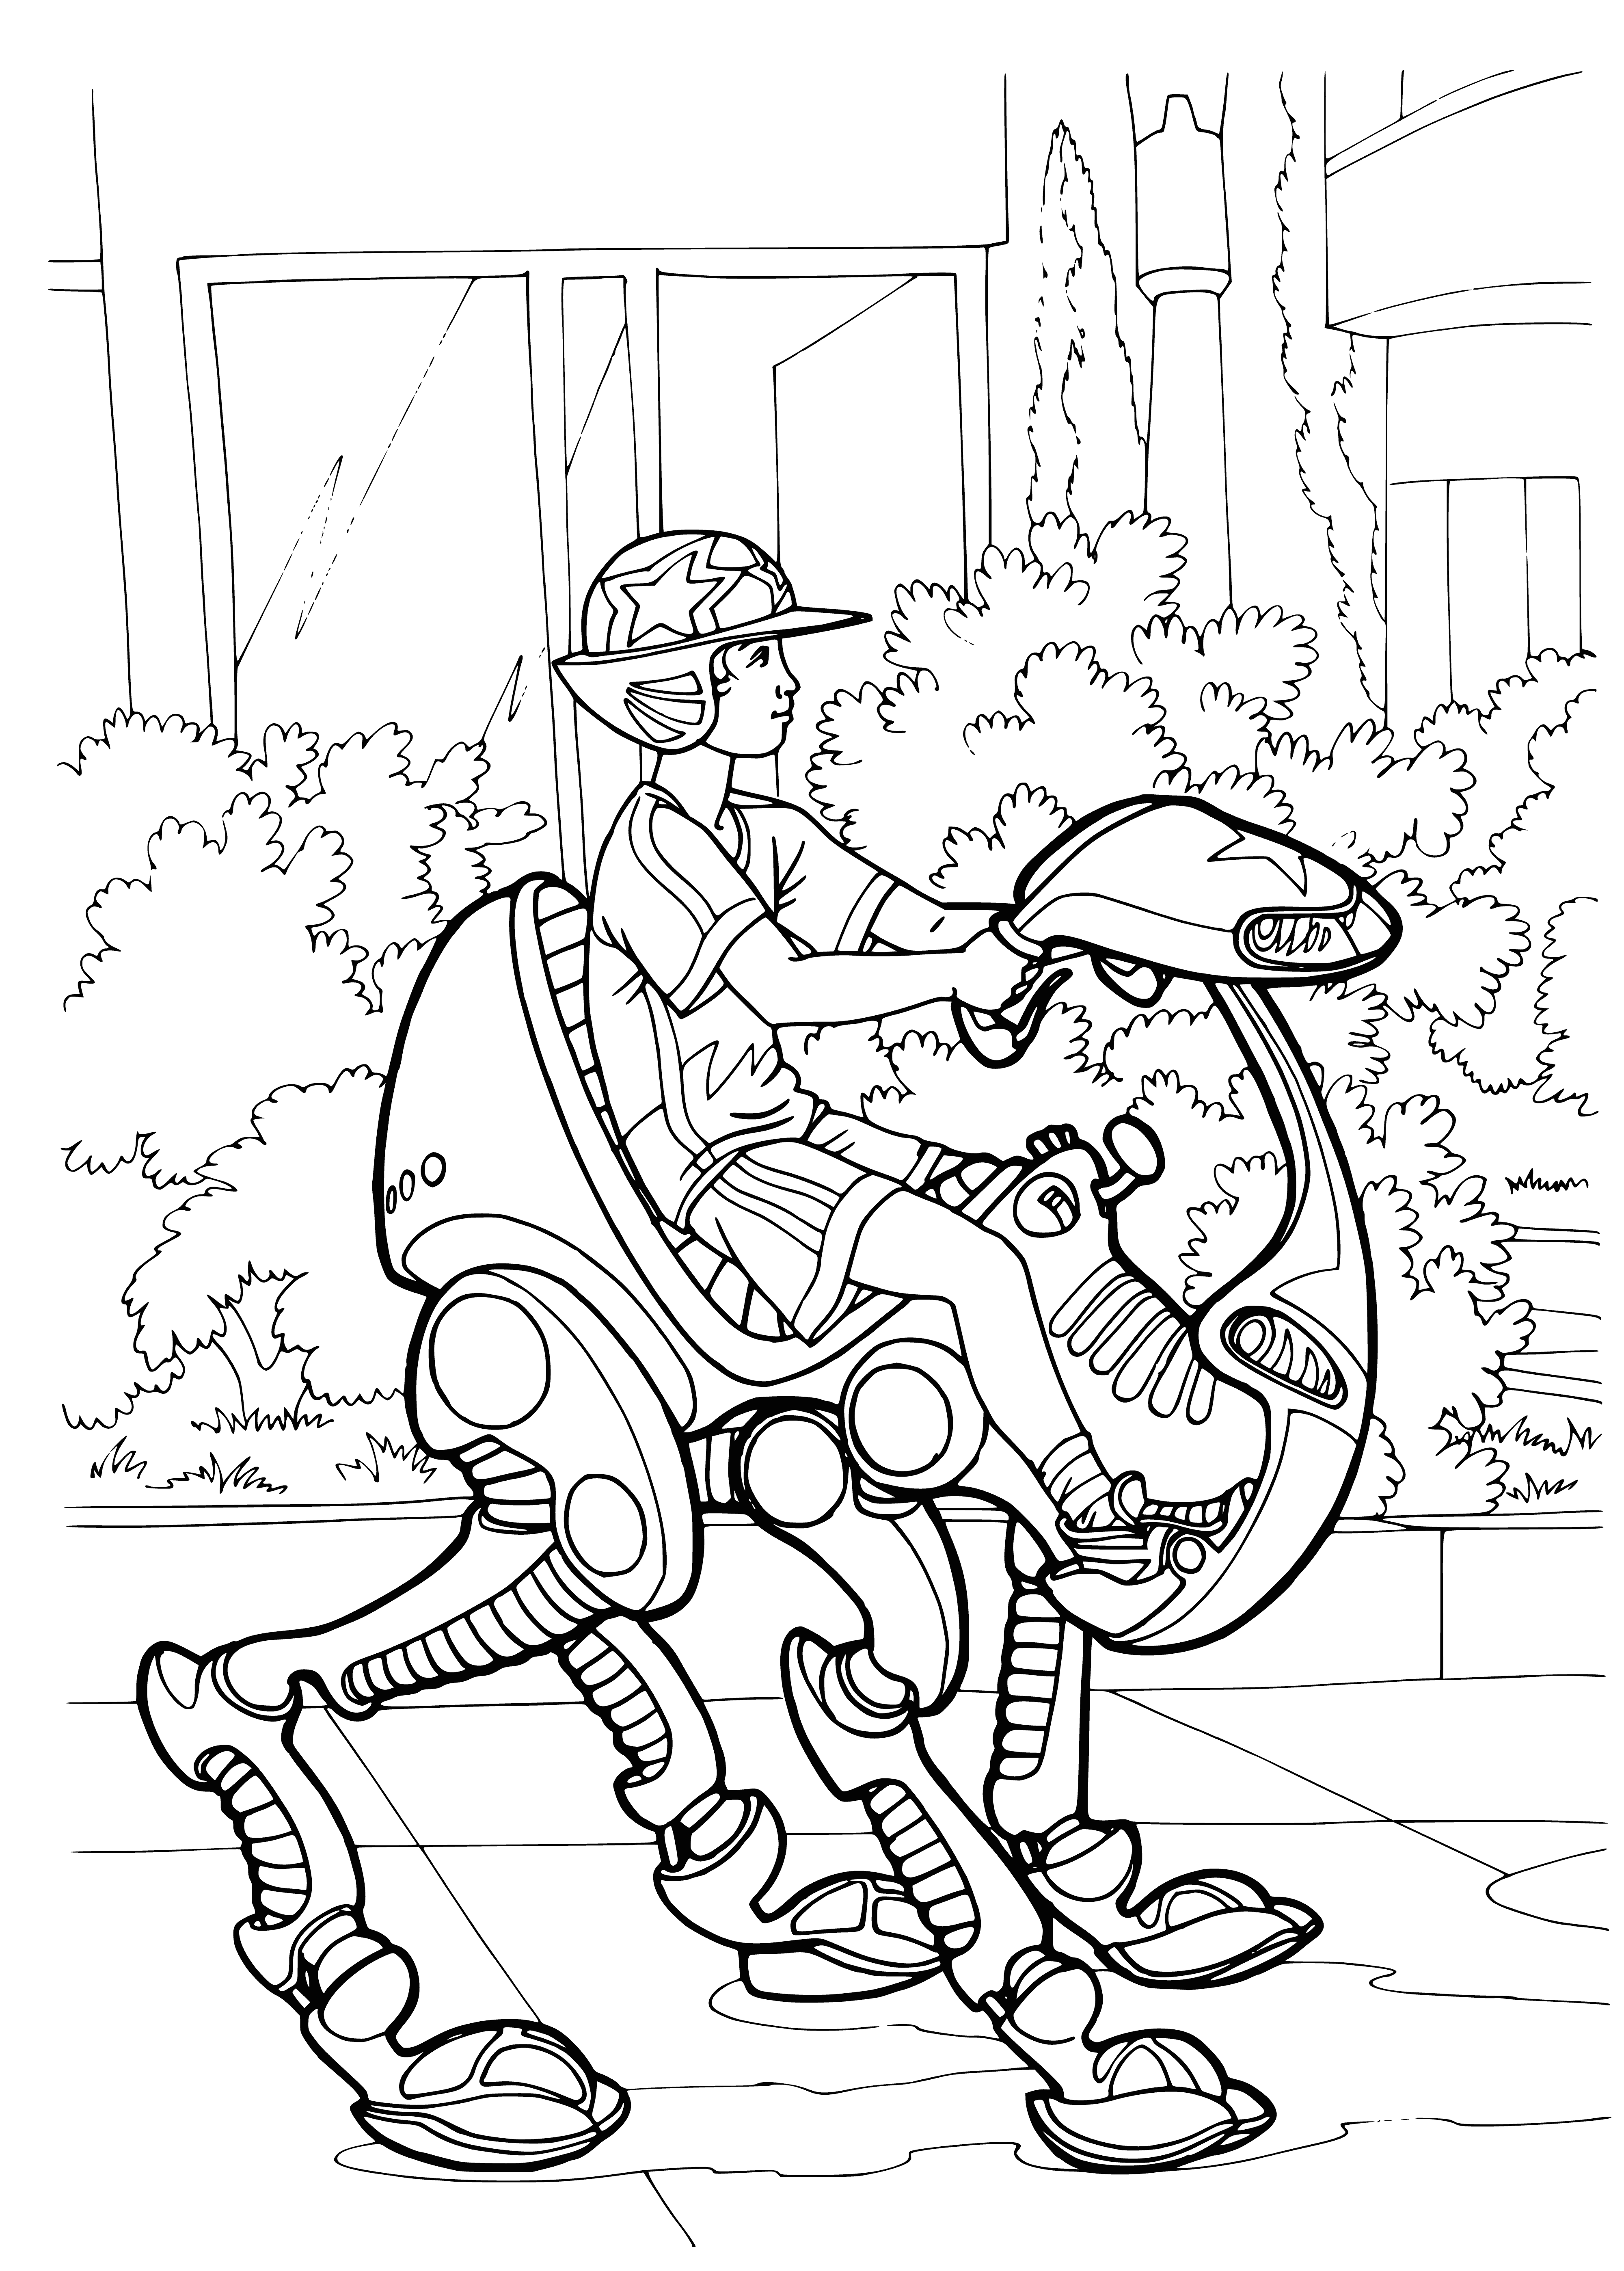 coloring page: Children using self-stepping transport to reach destination in coloring page. #transportation